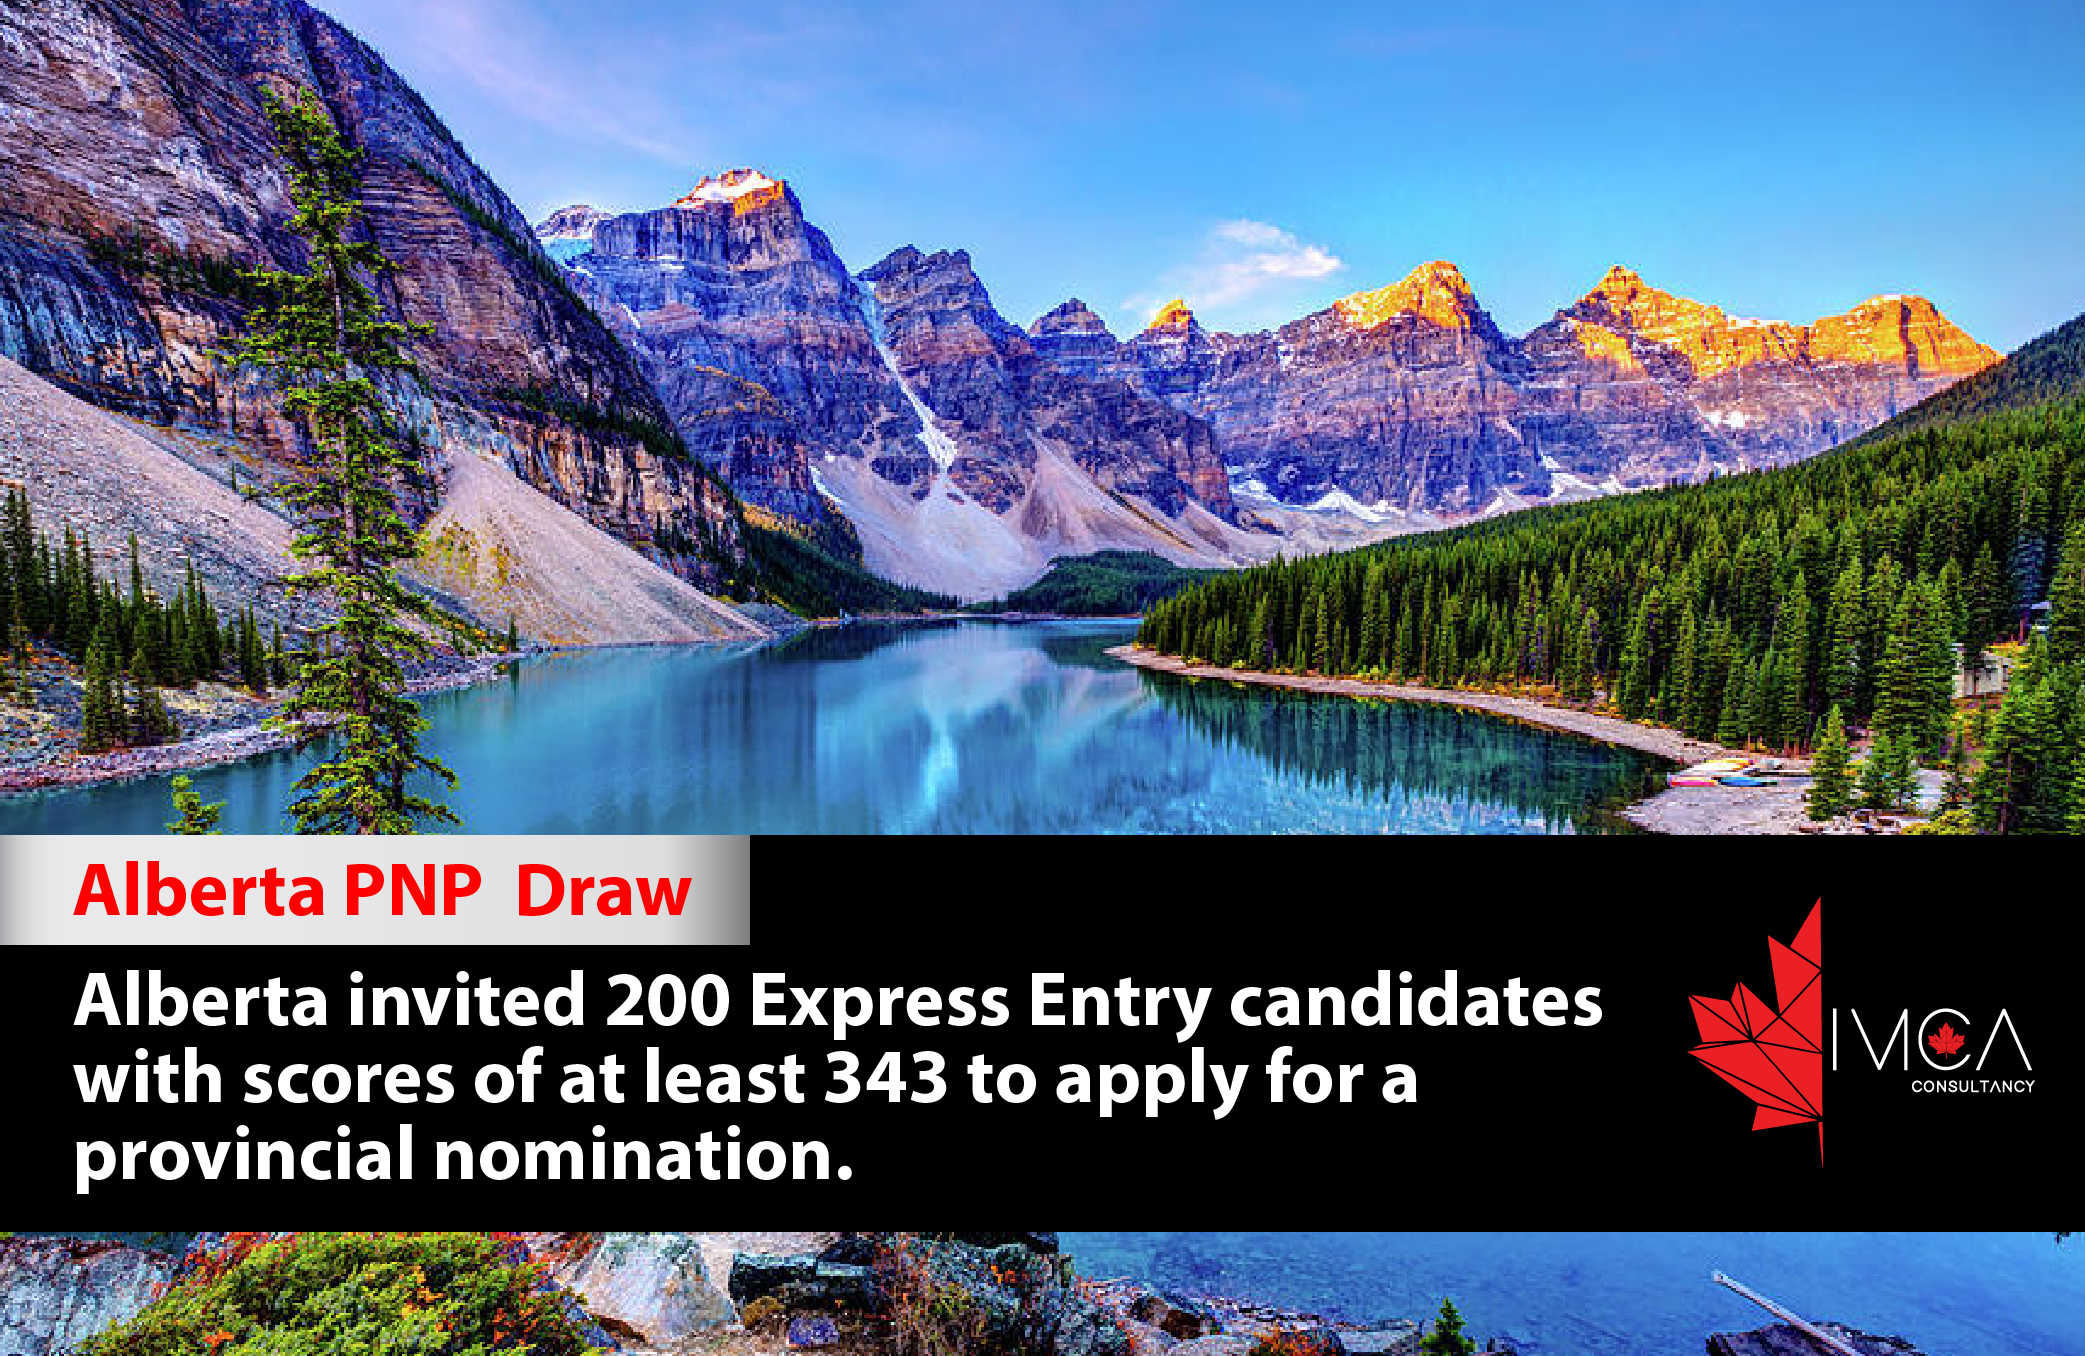 Latest Alberta PNP AINP Draw Update - May 19, 2022 - Nishkal Overseas  Consultancy | Alberta releases new May PNP draw results! The AINP invited  Express Entry candidates with scores as high